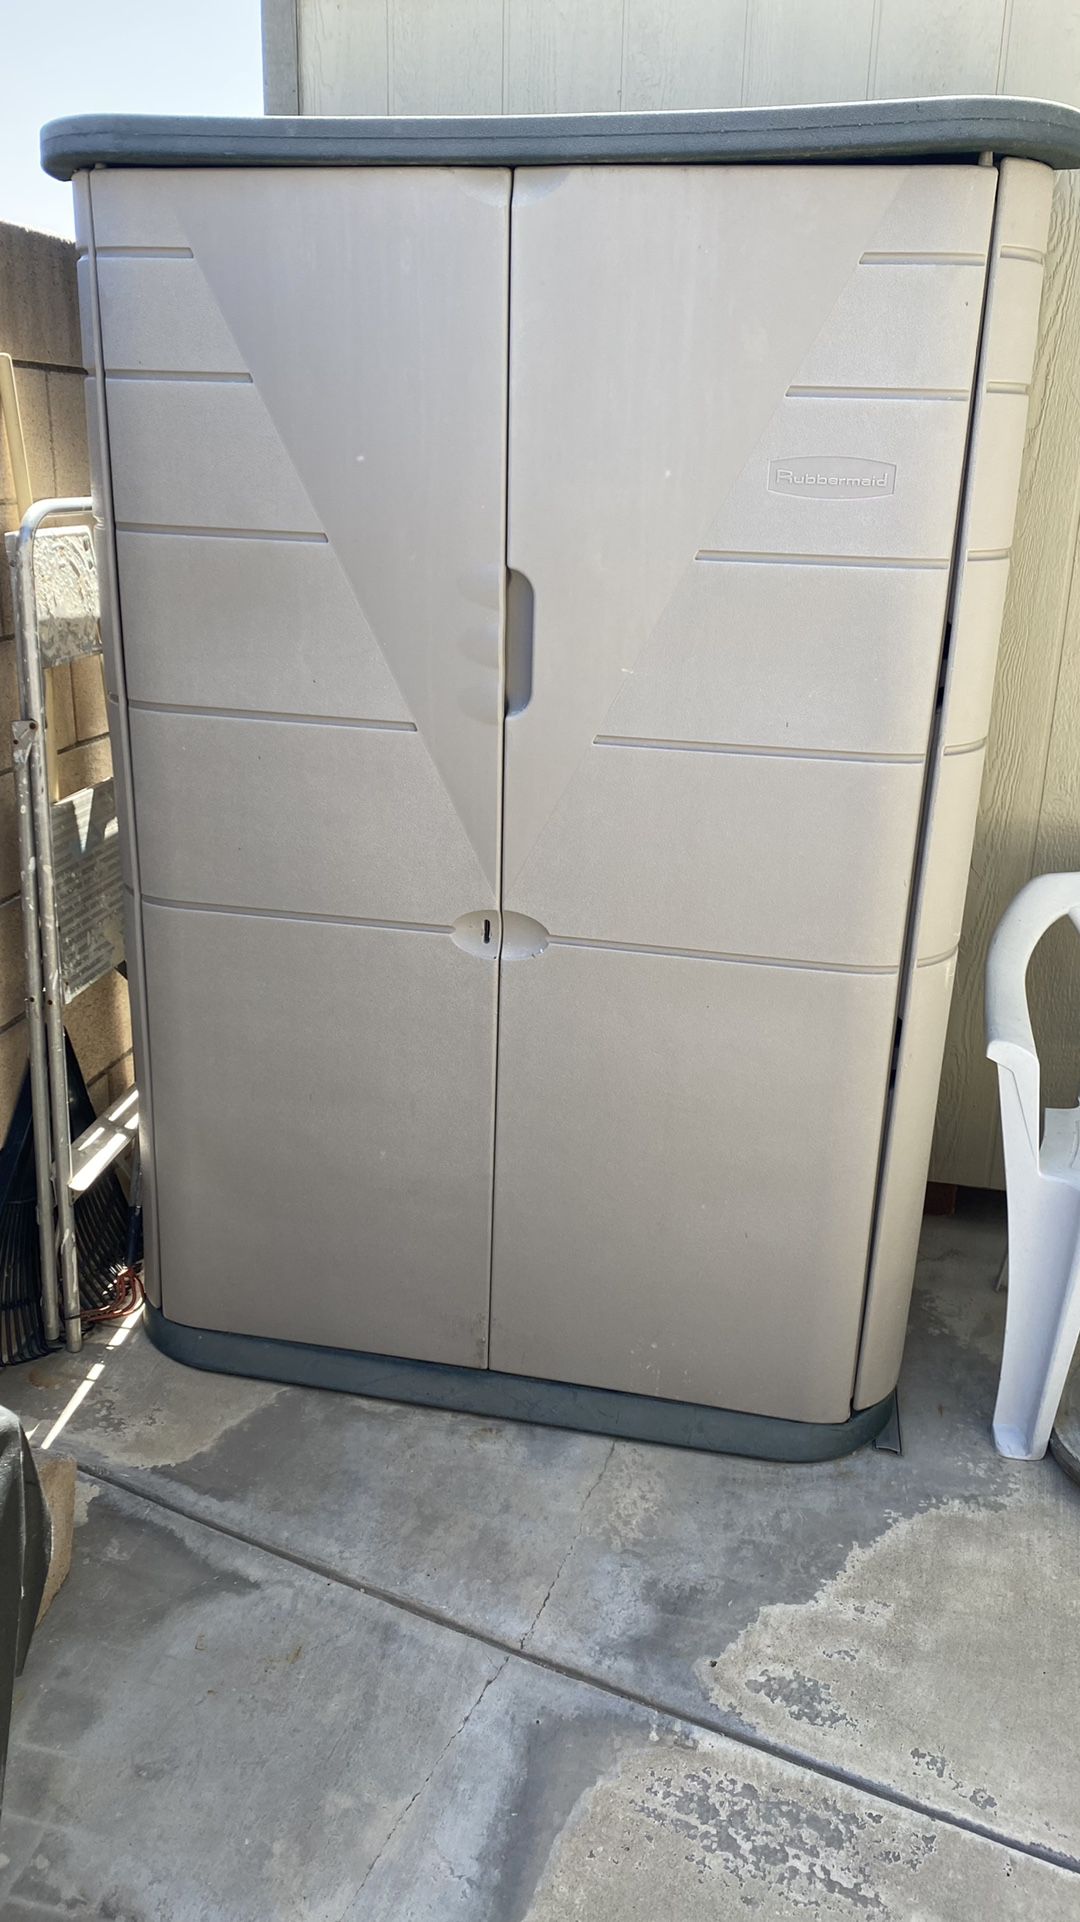 Rubbermaid Large Horizontal Resin Weather Resistant Outdoor Storage Shed,  32 cu. ft., Olive Steel/Sandstone for Sale in Hollywood, CA - OfferUp